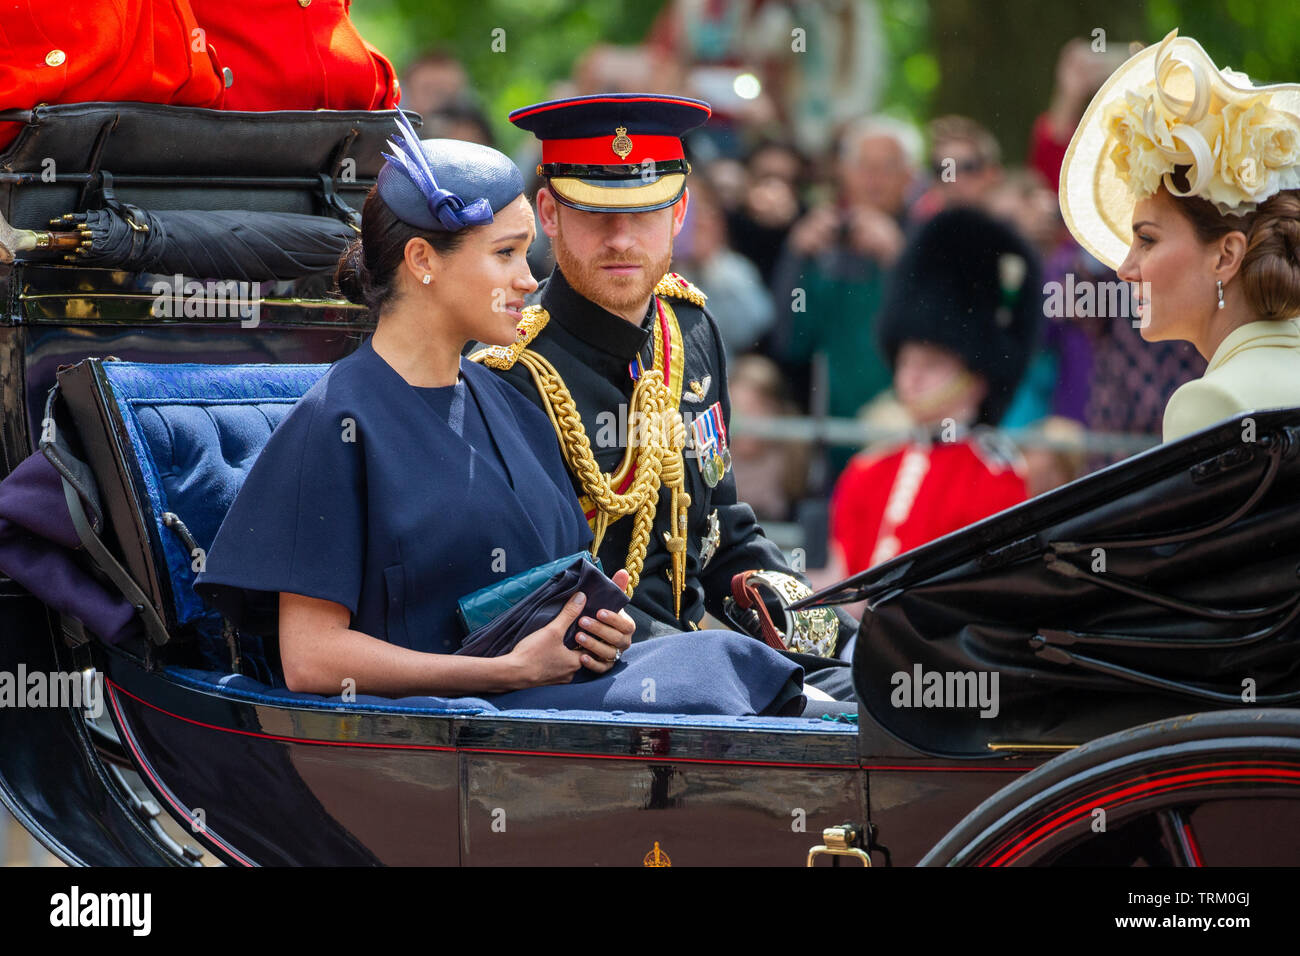 Picture dated June 8th shows Meghan,Duchess of Sussex,Prince Harry and Catherine Duchess of Cambridge at the Trooping the Colour in London today.   The Queen's official birthday has been marked with the annual Trooping the Colour parade. She was joined by members of her family and thousands of spectators to watch the display in Horse Guards Parade in Whitehall. The Prince of Wales, the Duchess of Cornwall, the Duke and Duchess of Cambridge and the Duke and Duchess of Sussex all attended. The Queen celebrated her 93rd birthday in April. The royal colonels - the Prince of Wales, colonel of the W Stock Photo